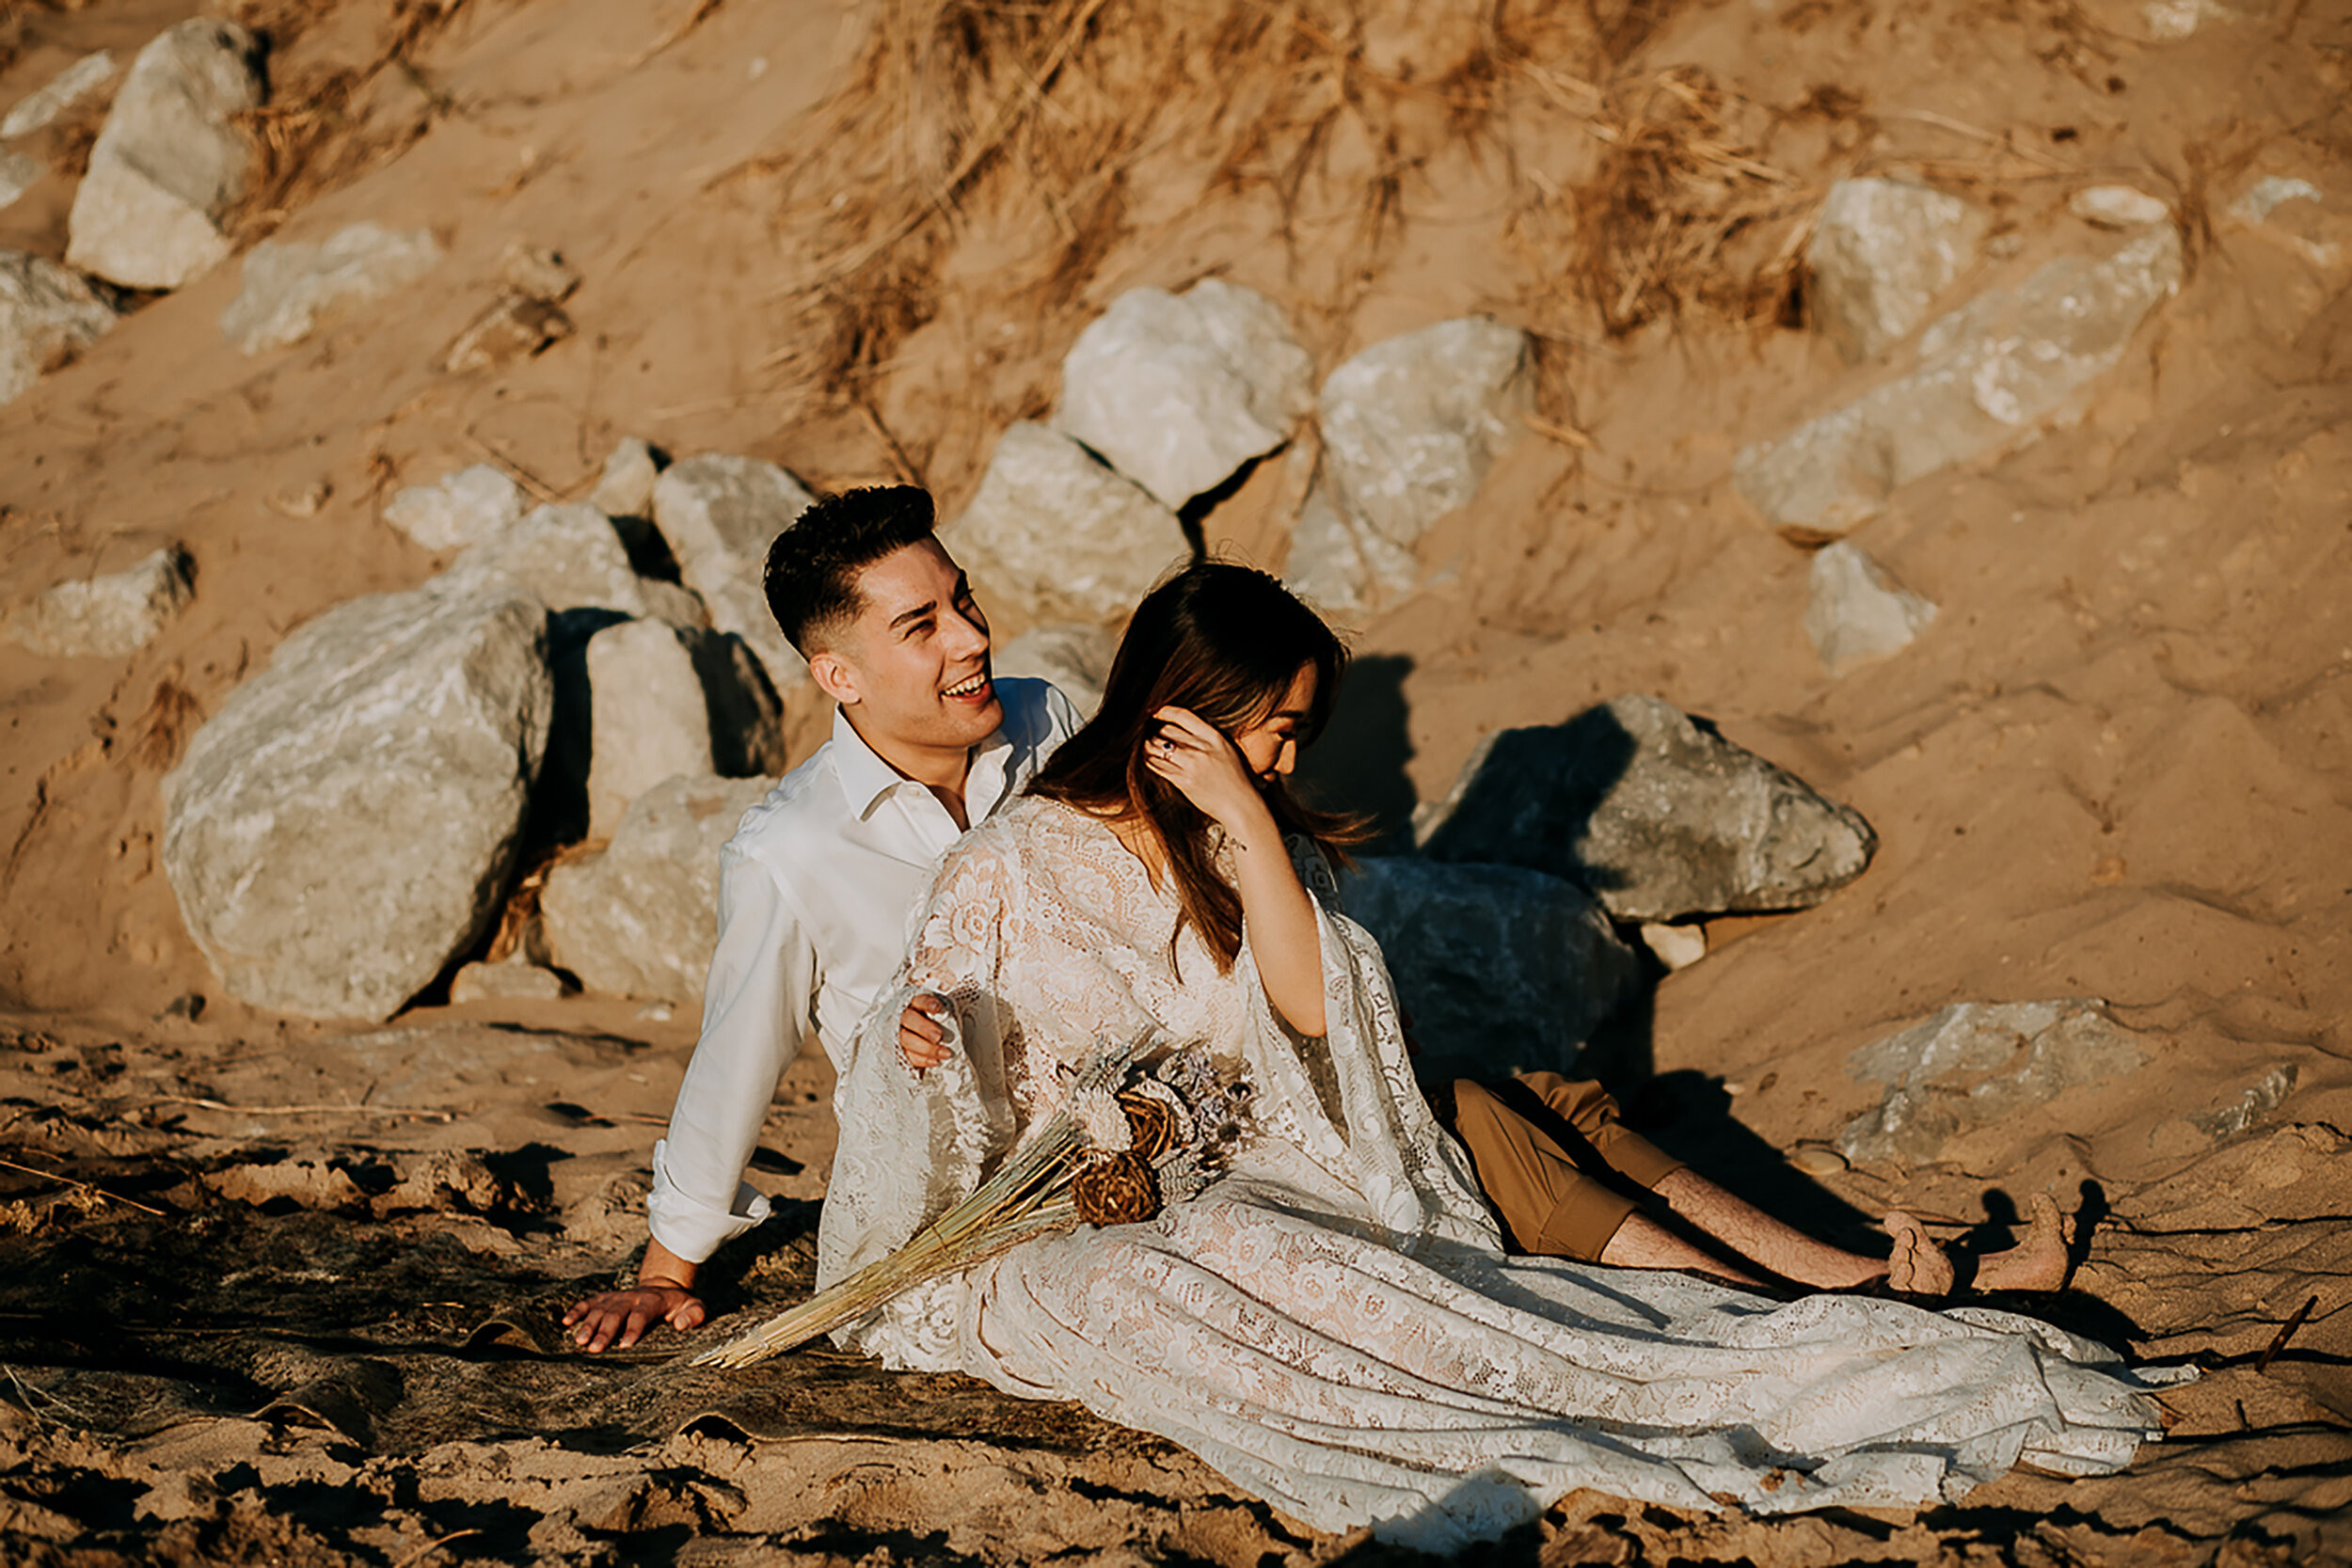  Blissfully candid wedding moments captured by Kindred &amp; Co. Photography in Indiana Dunes State Park. 2ct blue diamond wedding ring, loose fitted lace bohemian elopement wedding dress, bride and groom sitting and laughing elopement picnic, profes